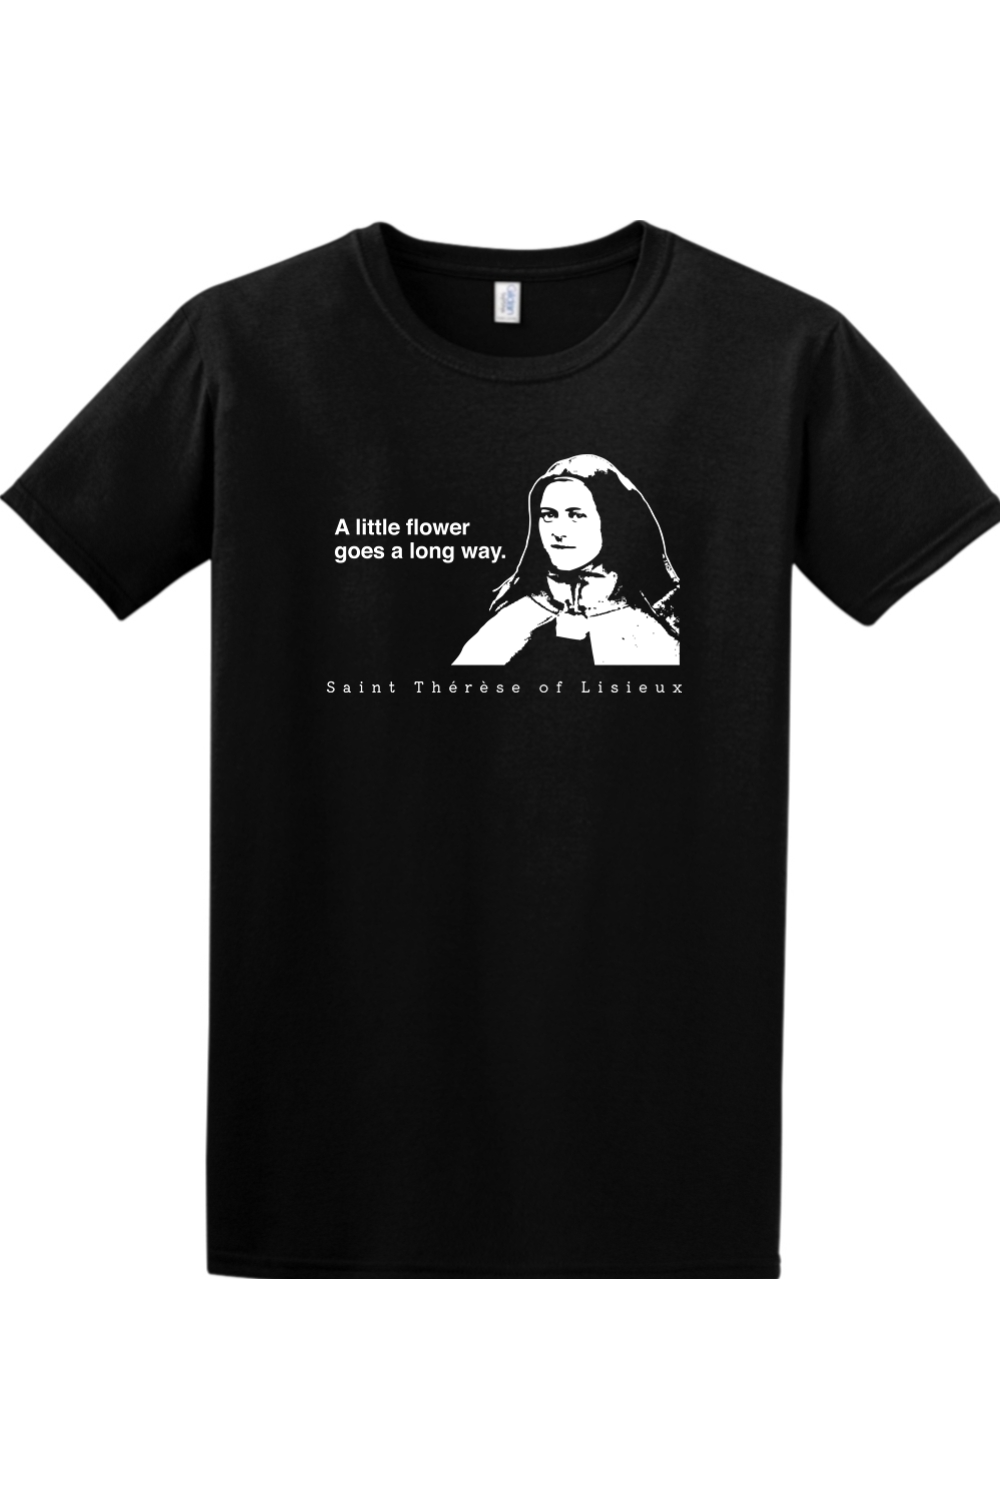 A Little Flower Goes a Long Way - St. Thérèse of Lisieux Adult Adult T-shirt